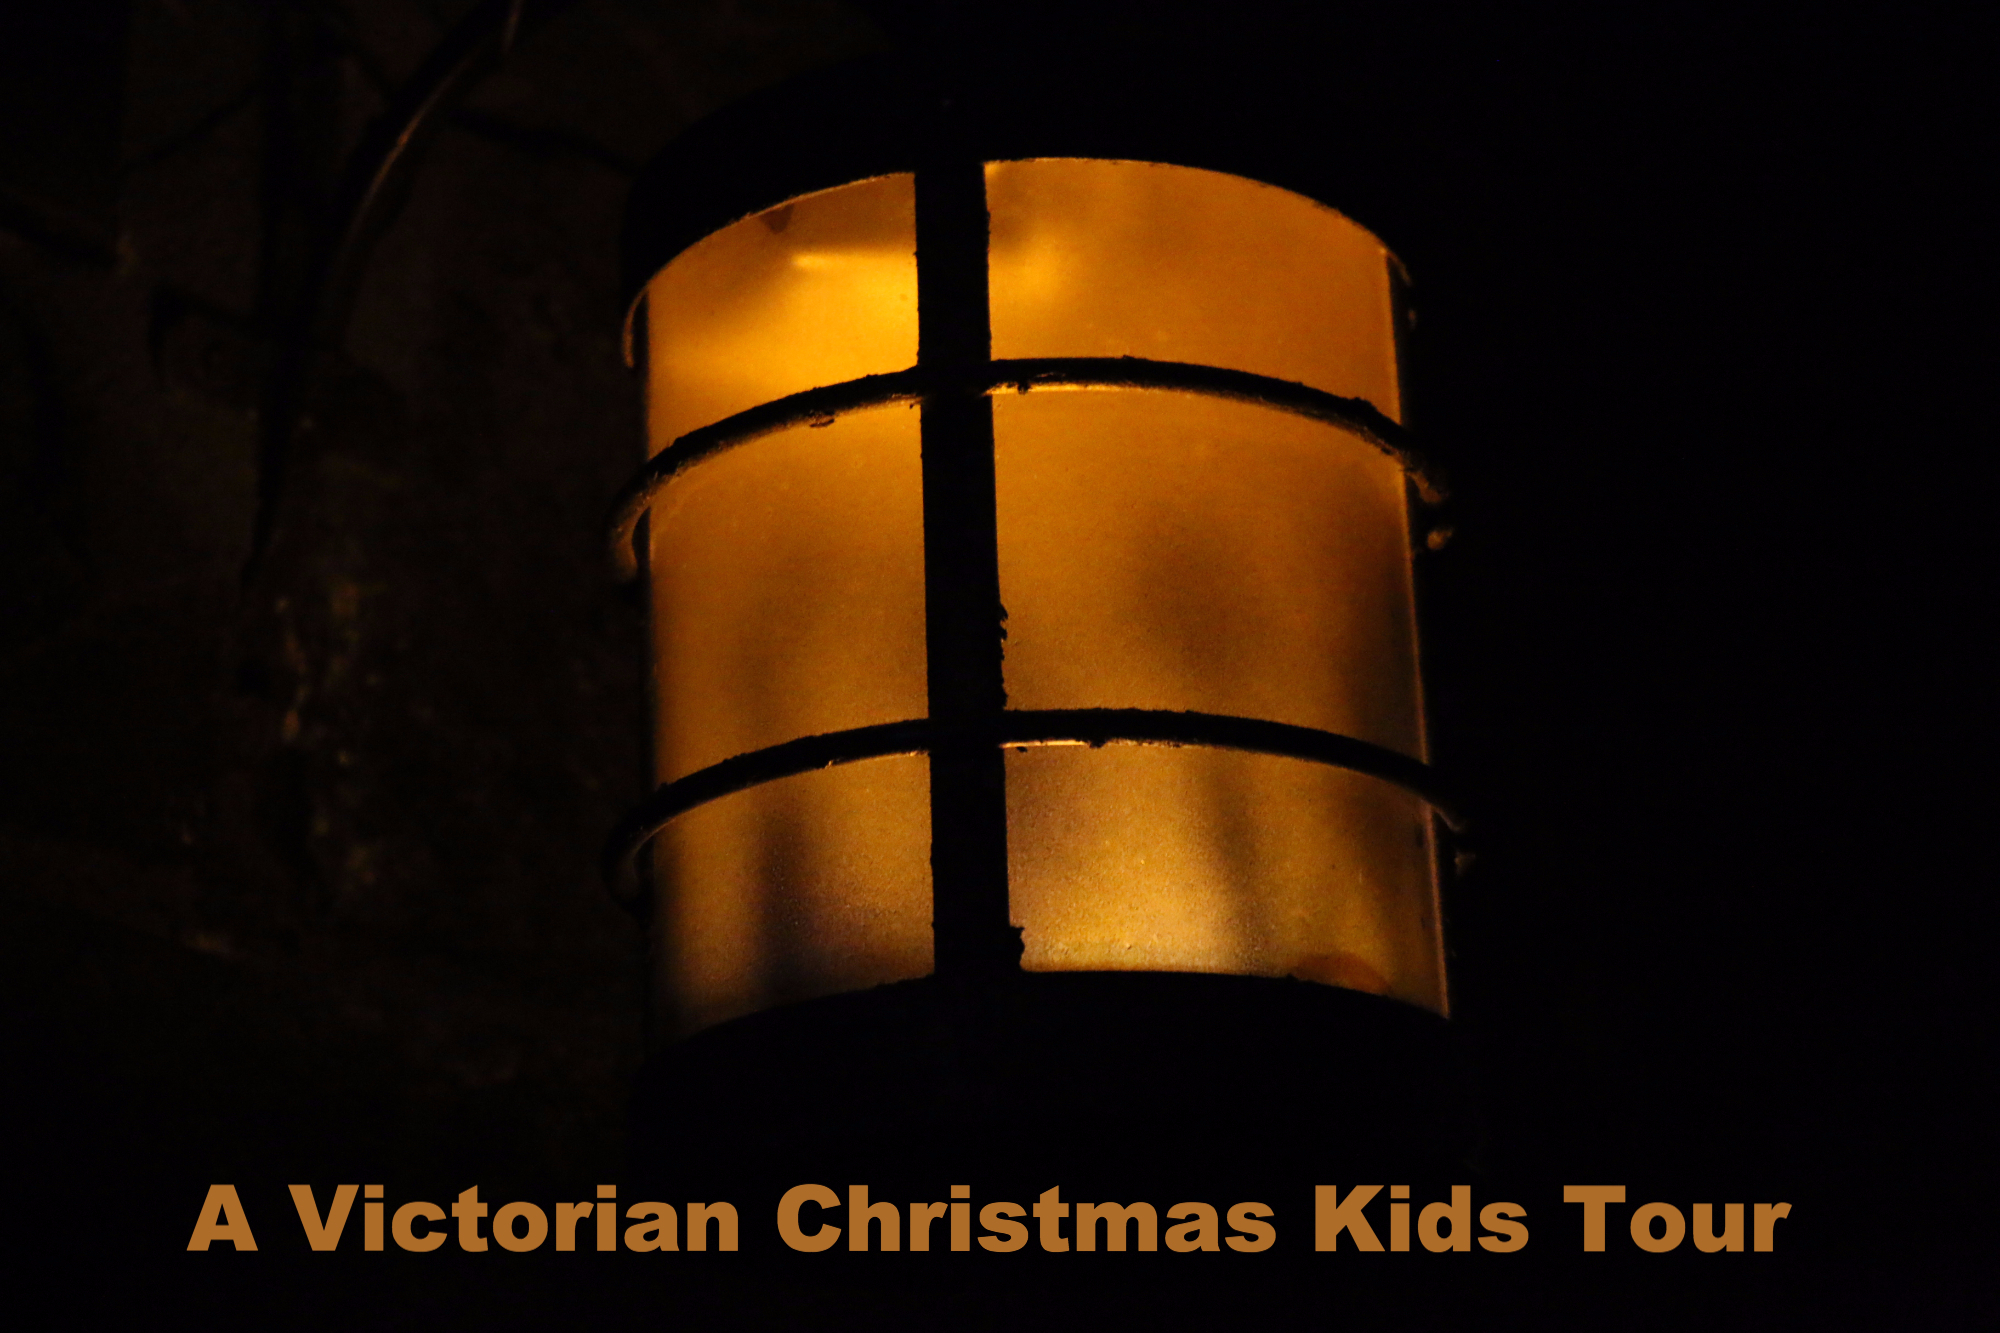 A Victorian Christmas tour for kids and families